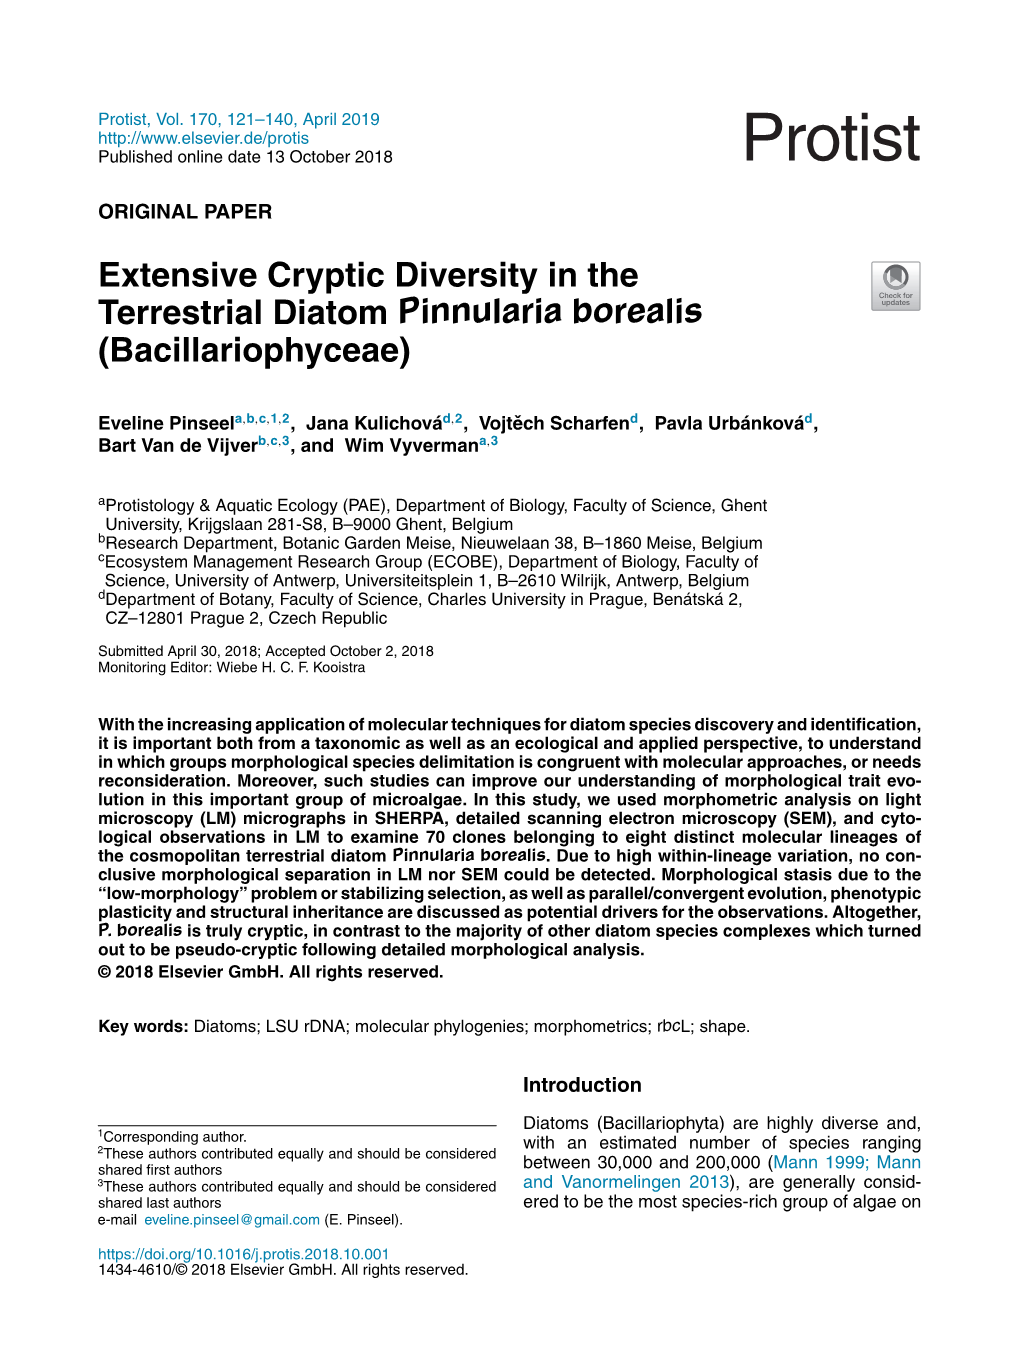 Extensive Cryptic Diversity in the Terrestrial Diatom Pinnularia